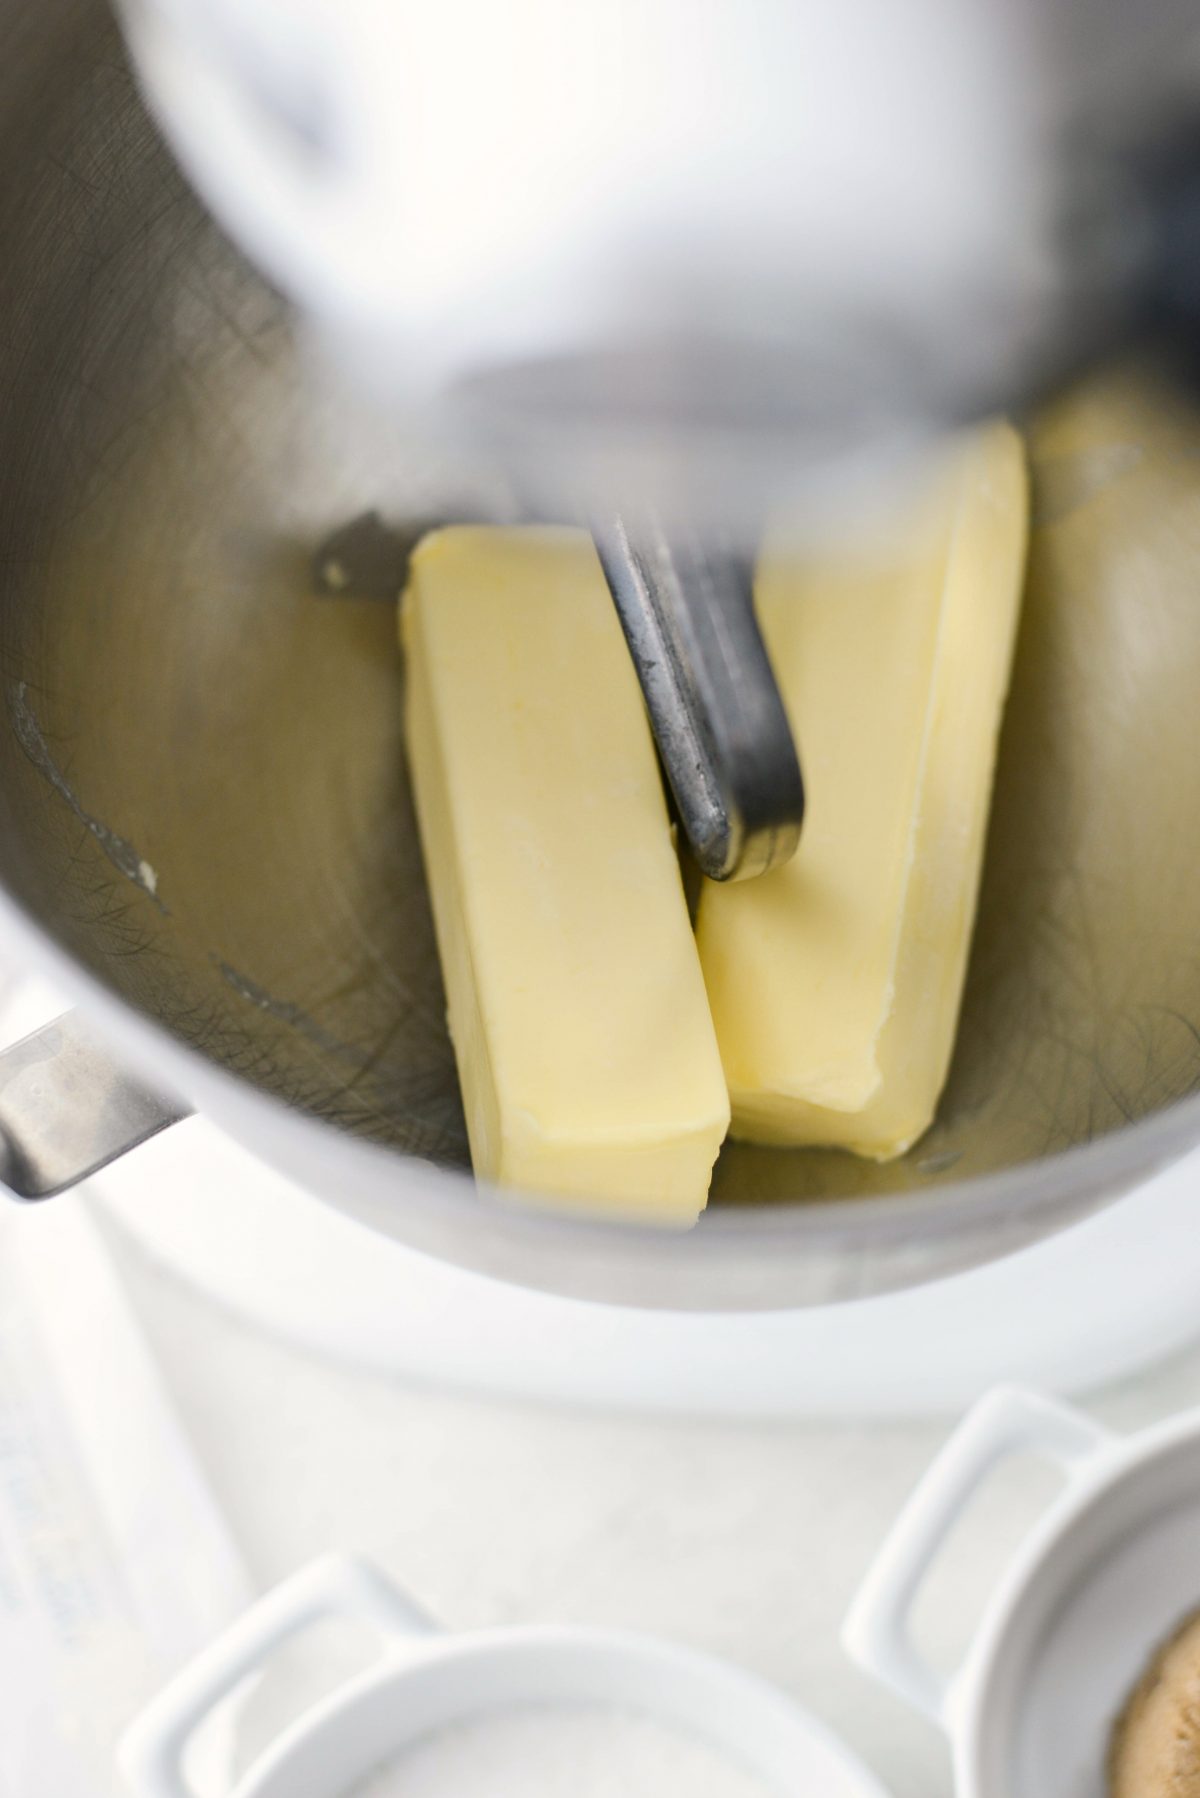 softened butter in mixer.